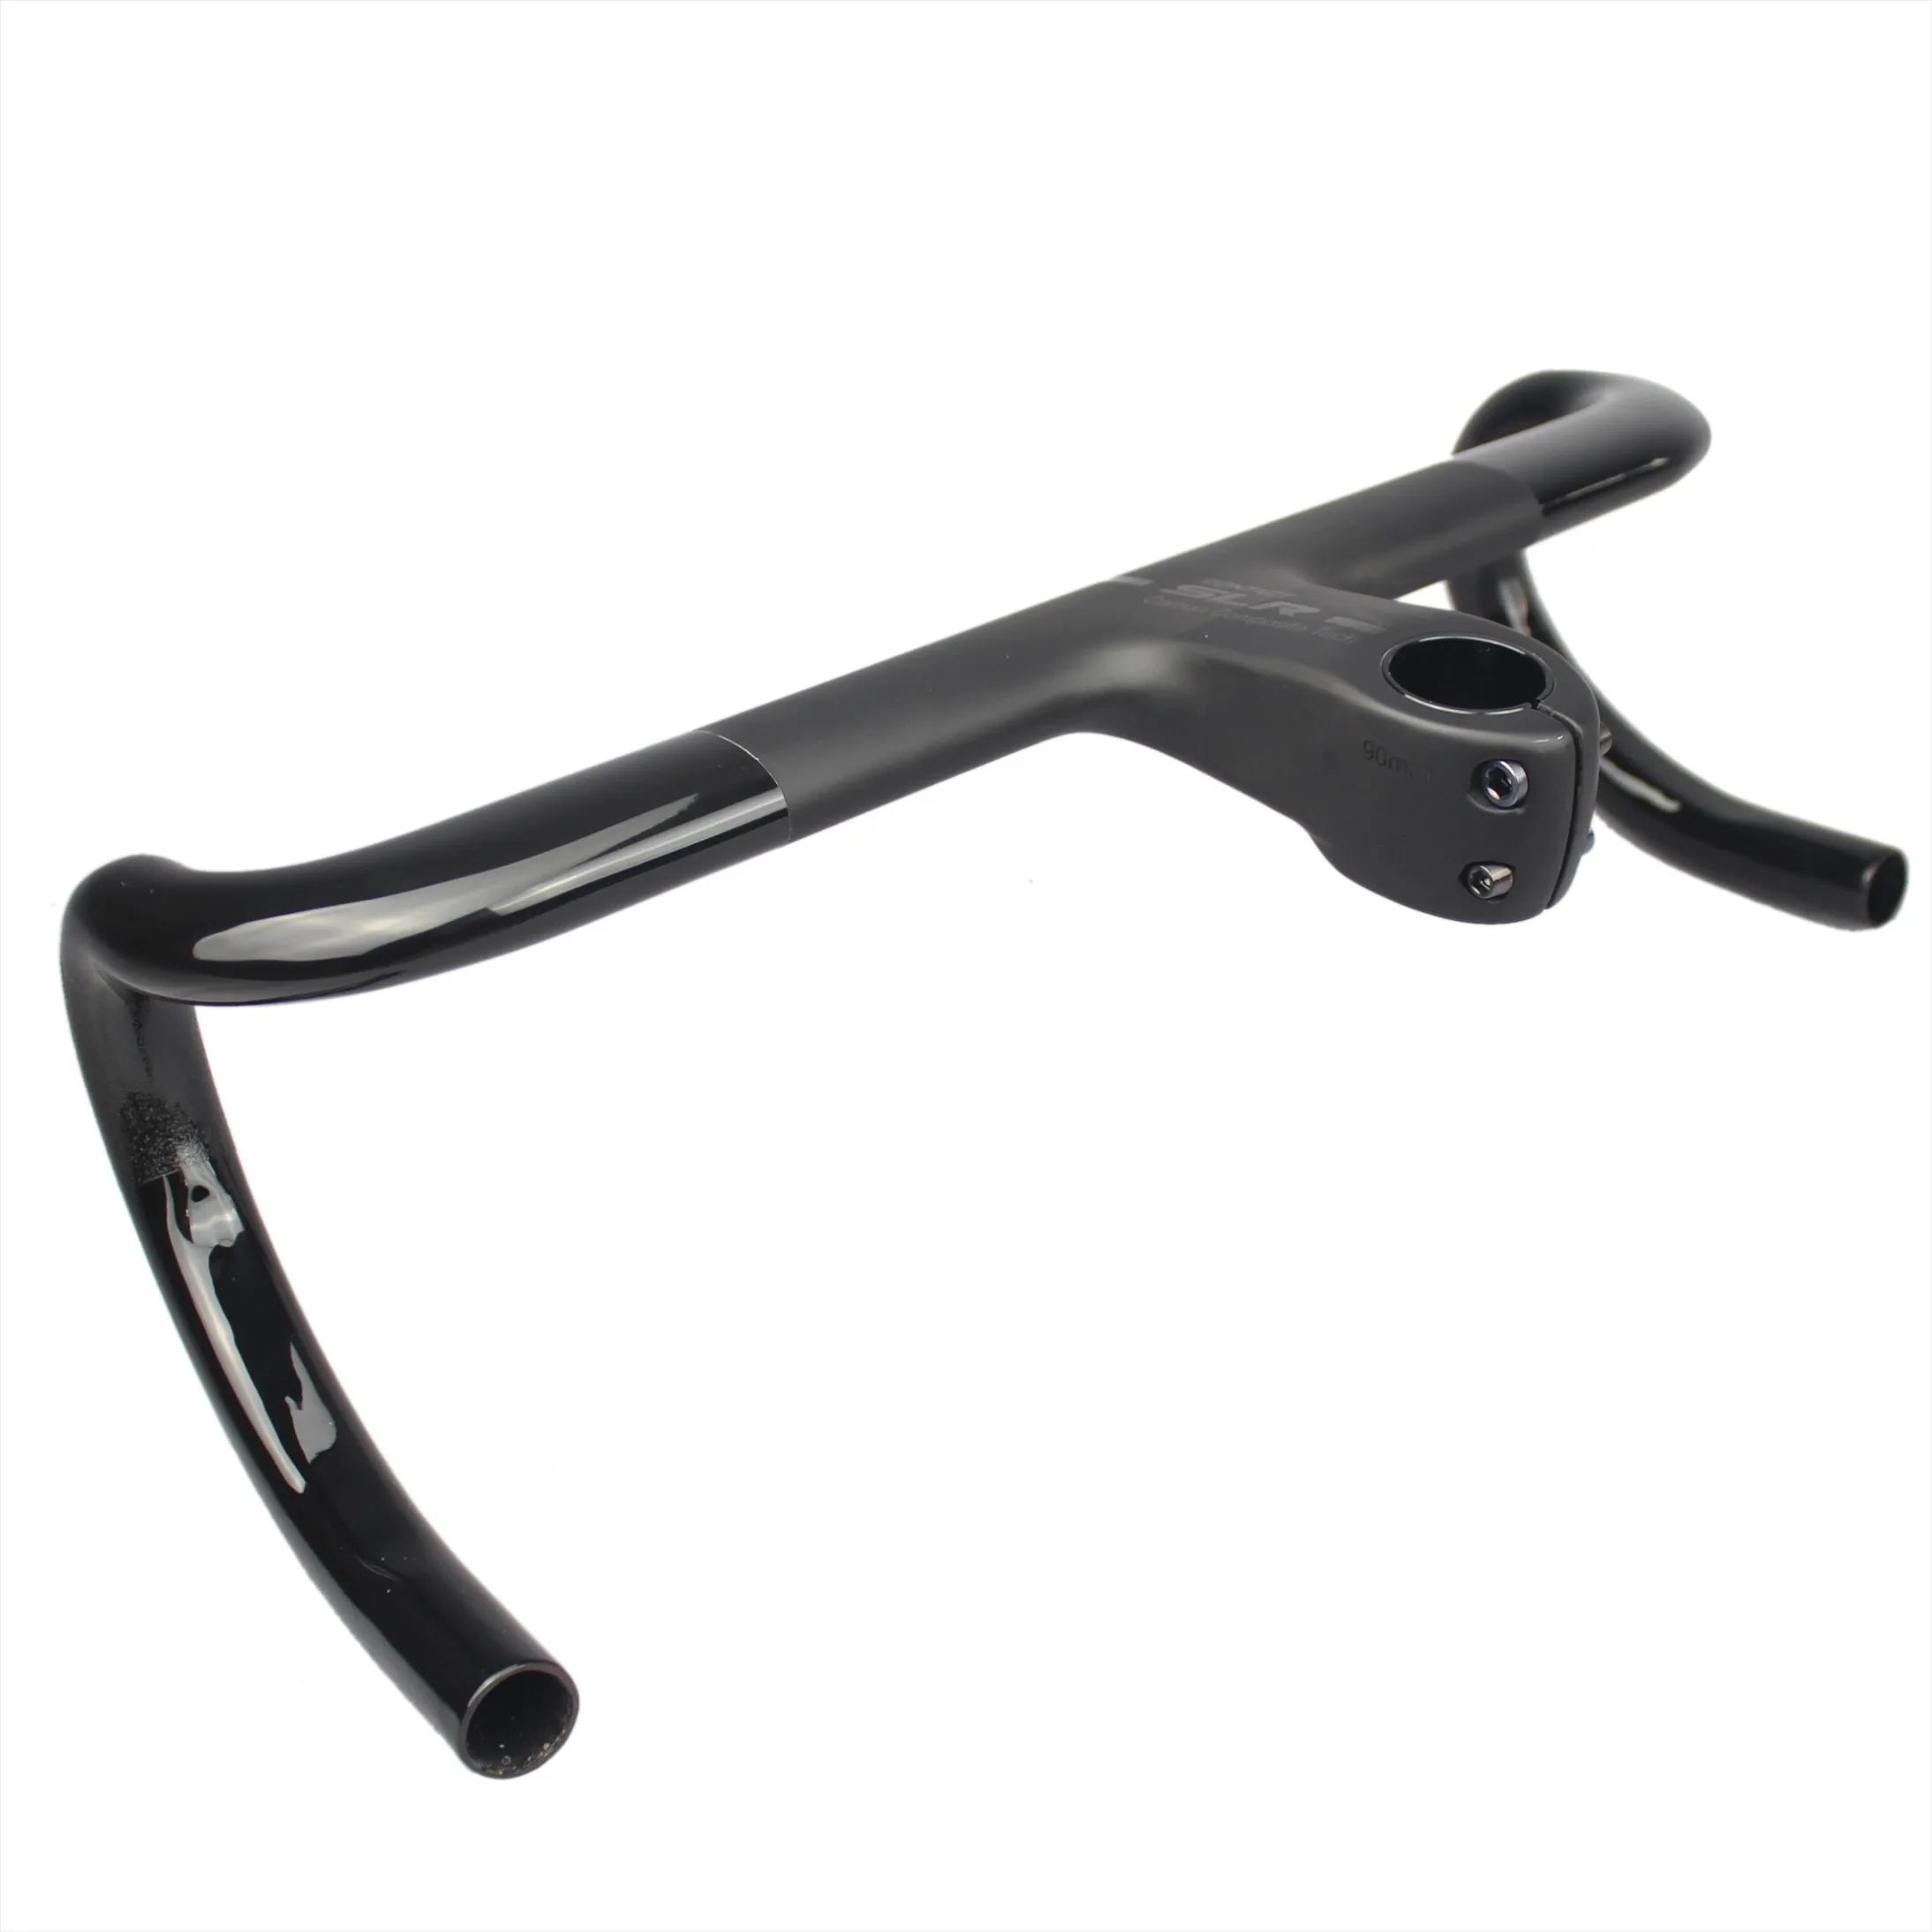 

Miracle road bike carbon handlebar size 380/400/420/440*90/100/110/120mm bicycle handlebar integrated carbon with stem, Black